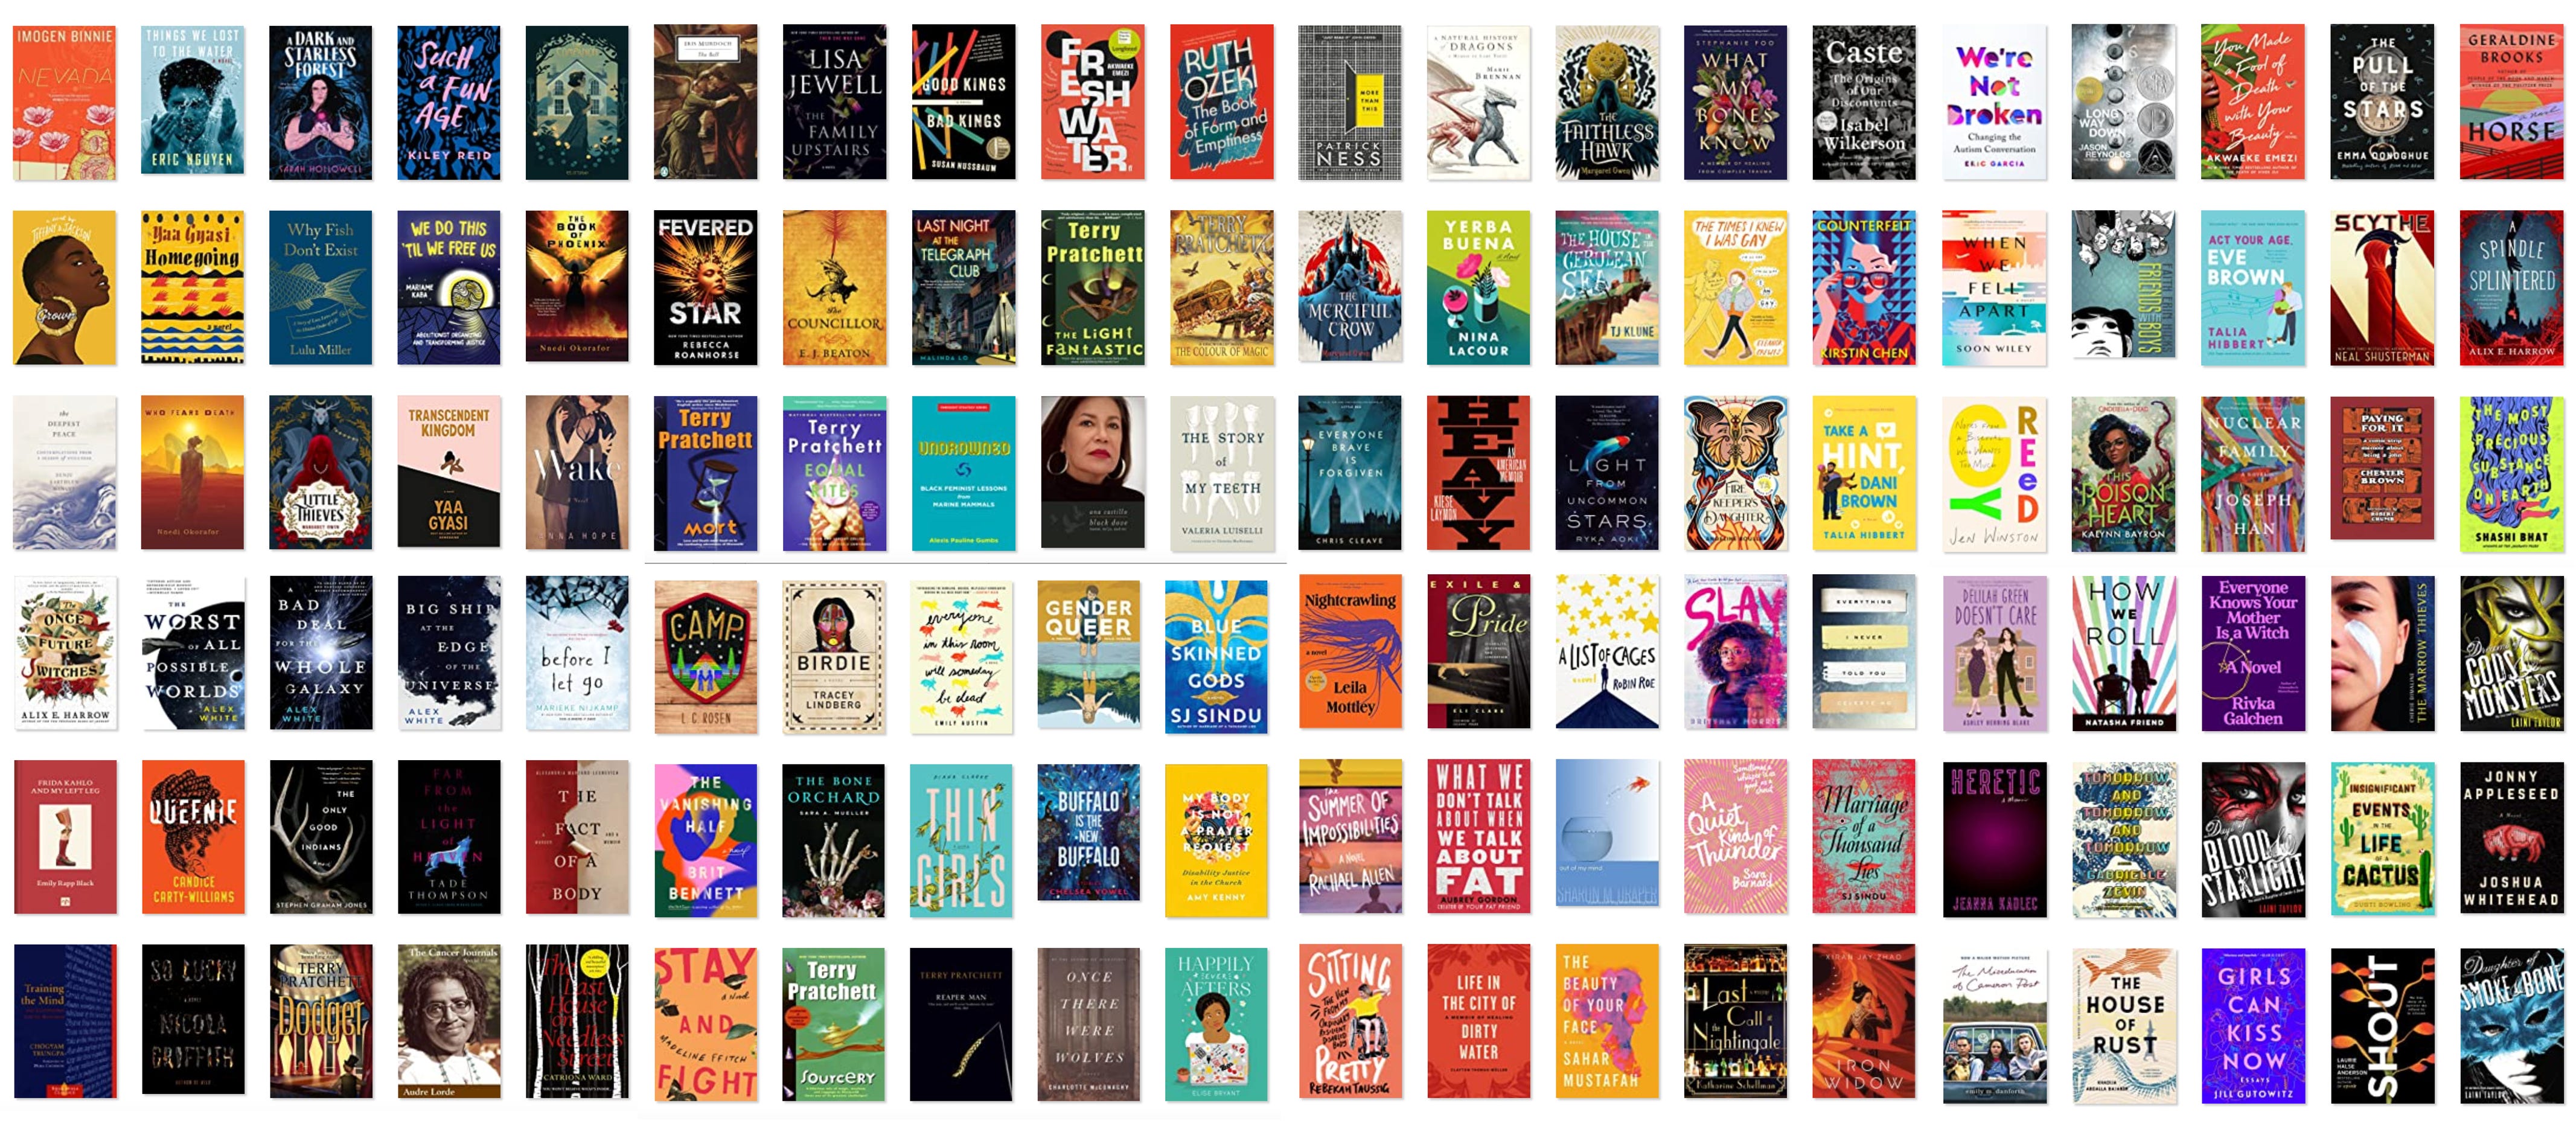 Screencapture of all 120 books this blog author read in the year 2022